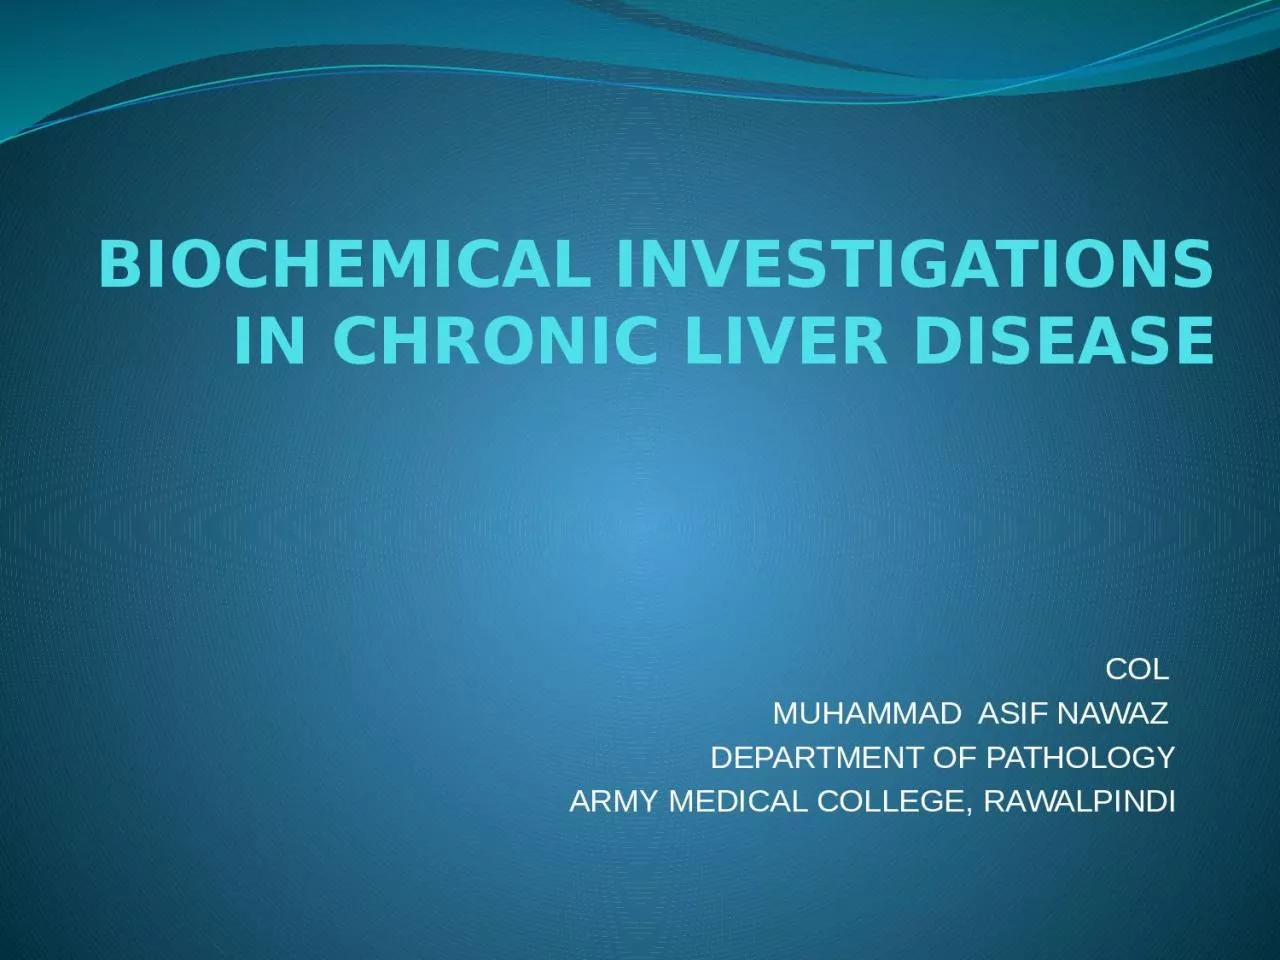 BIOCHEMICAL INVESTIGATIONS IN CHRONIC LIVER DISEASE